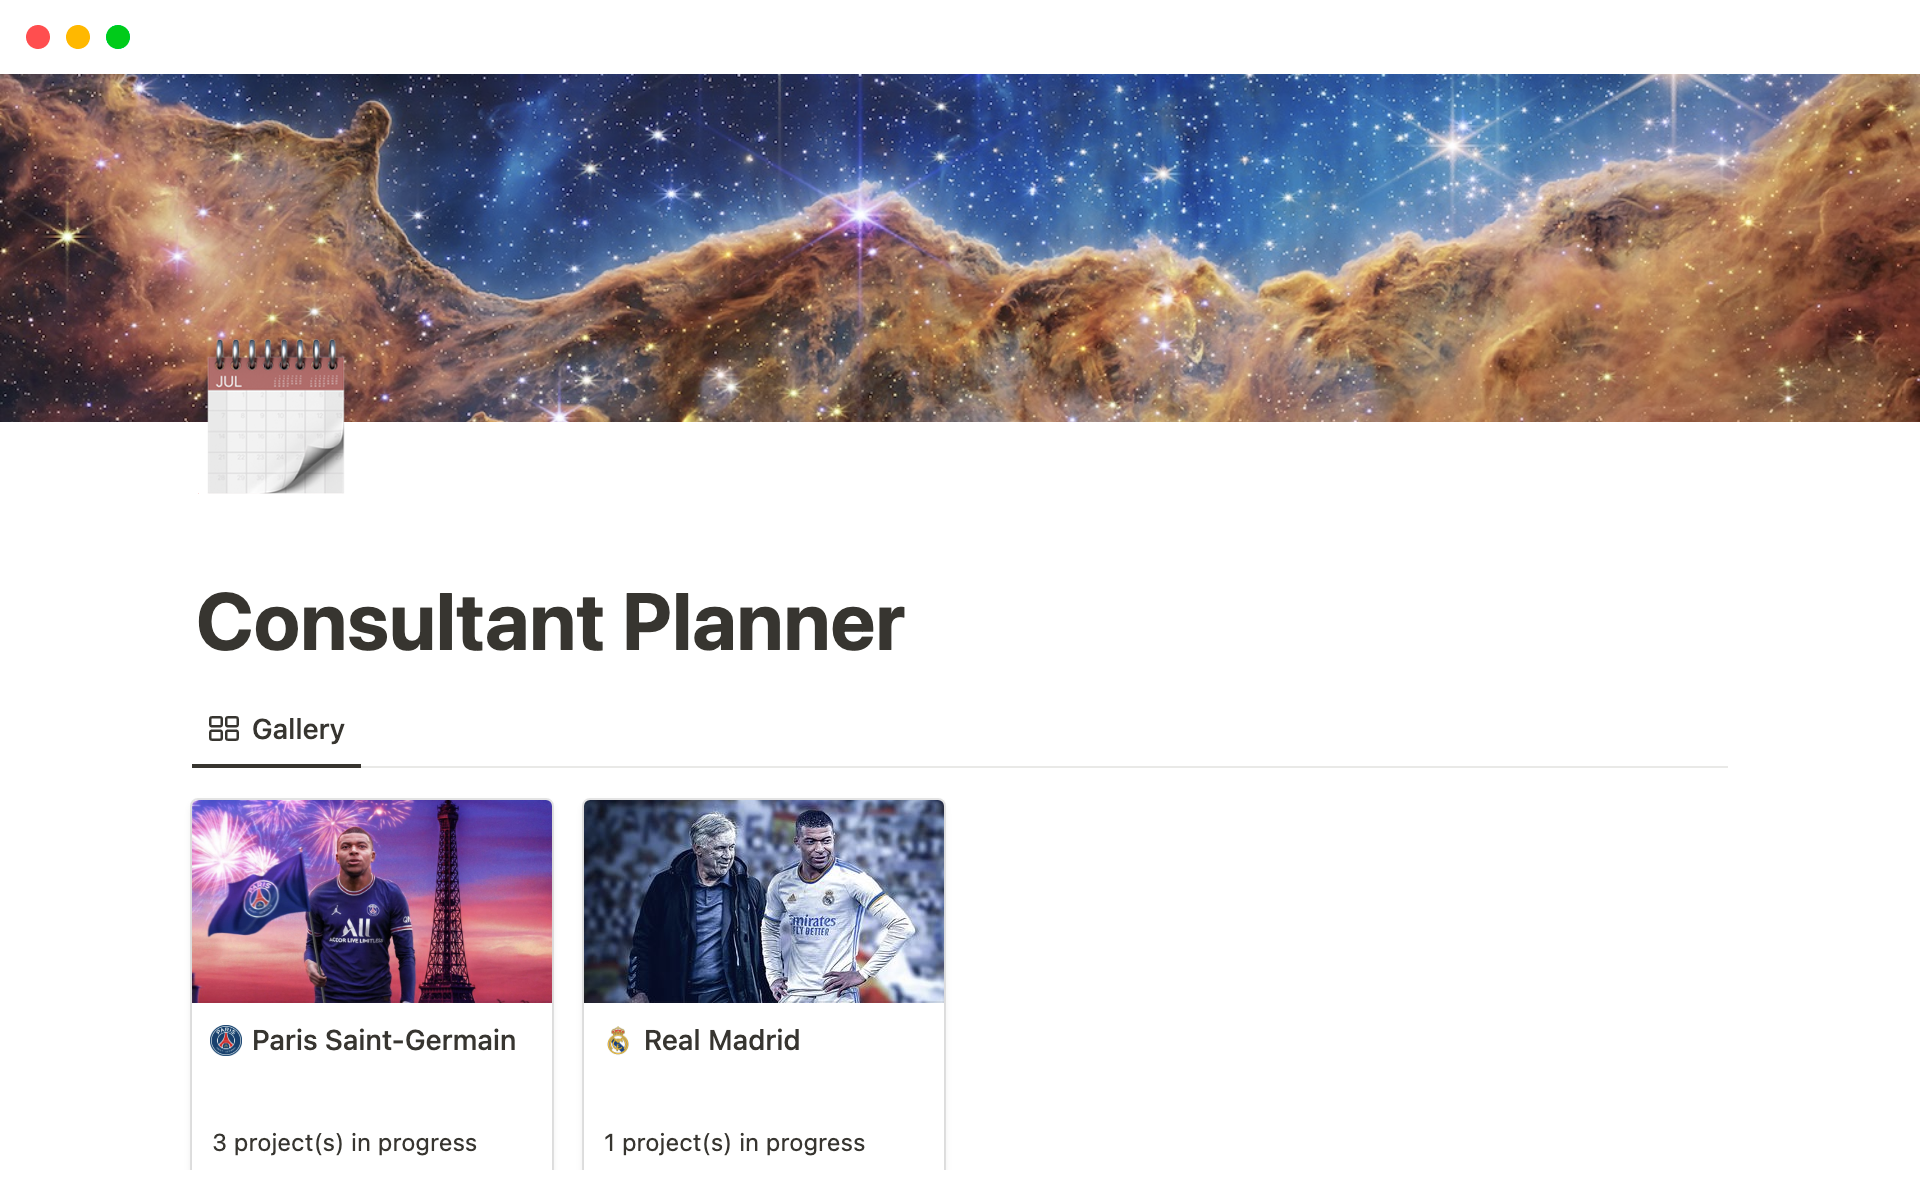 This is a consultant planner, this will help you to keep track and manage every project you have with all your clients